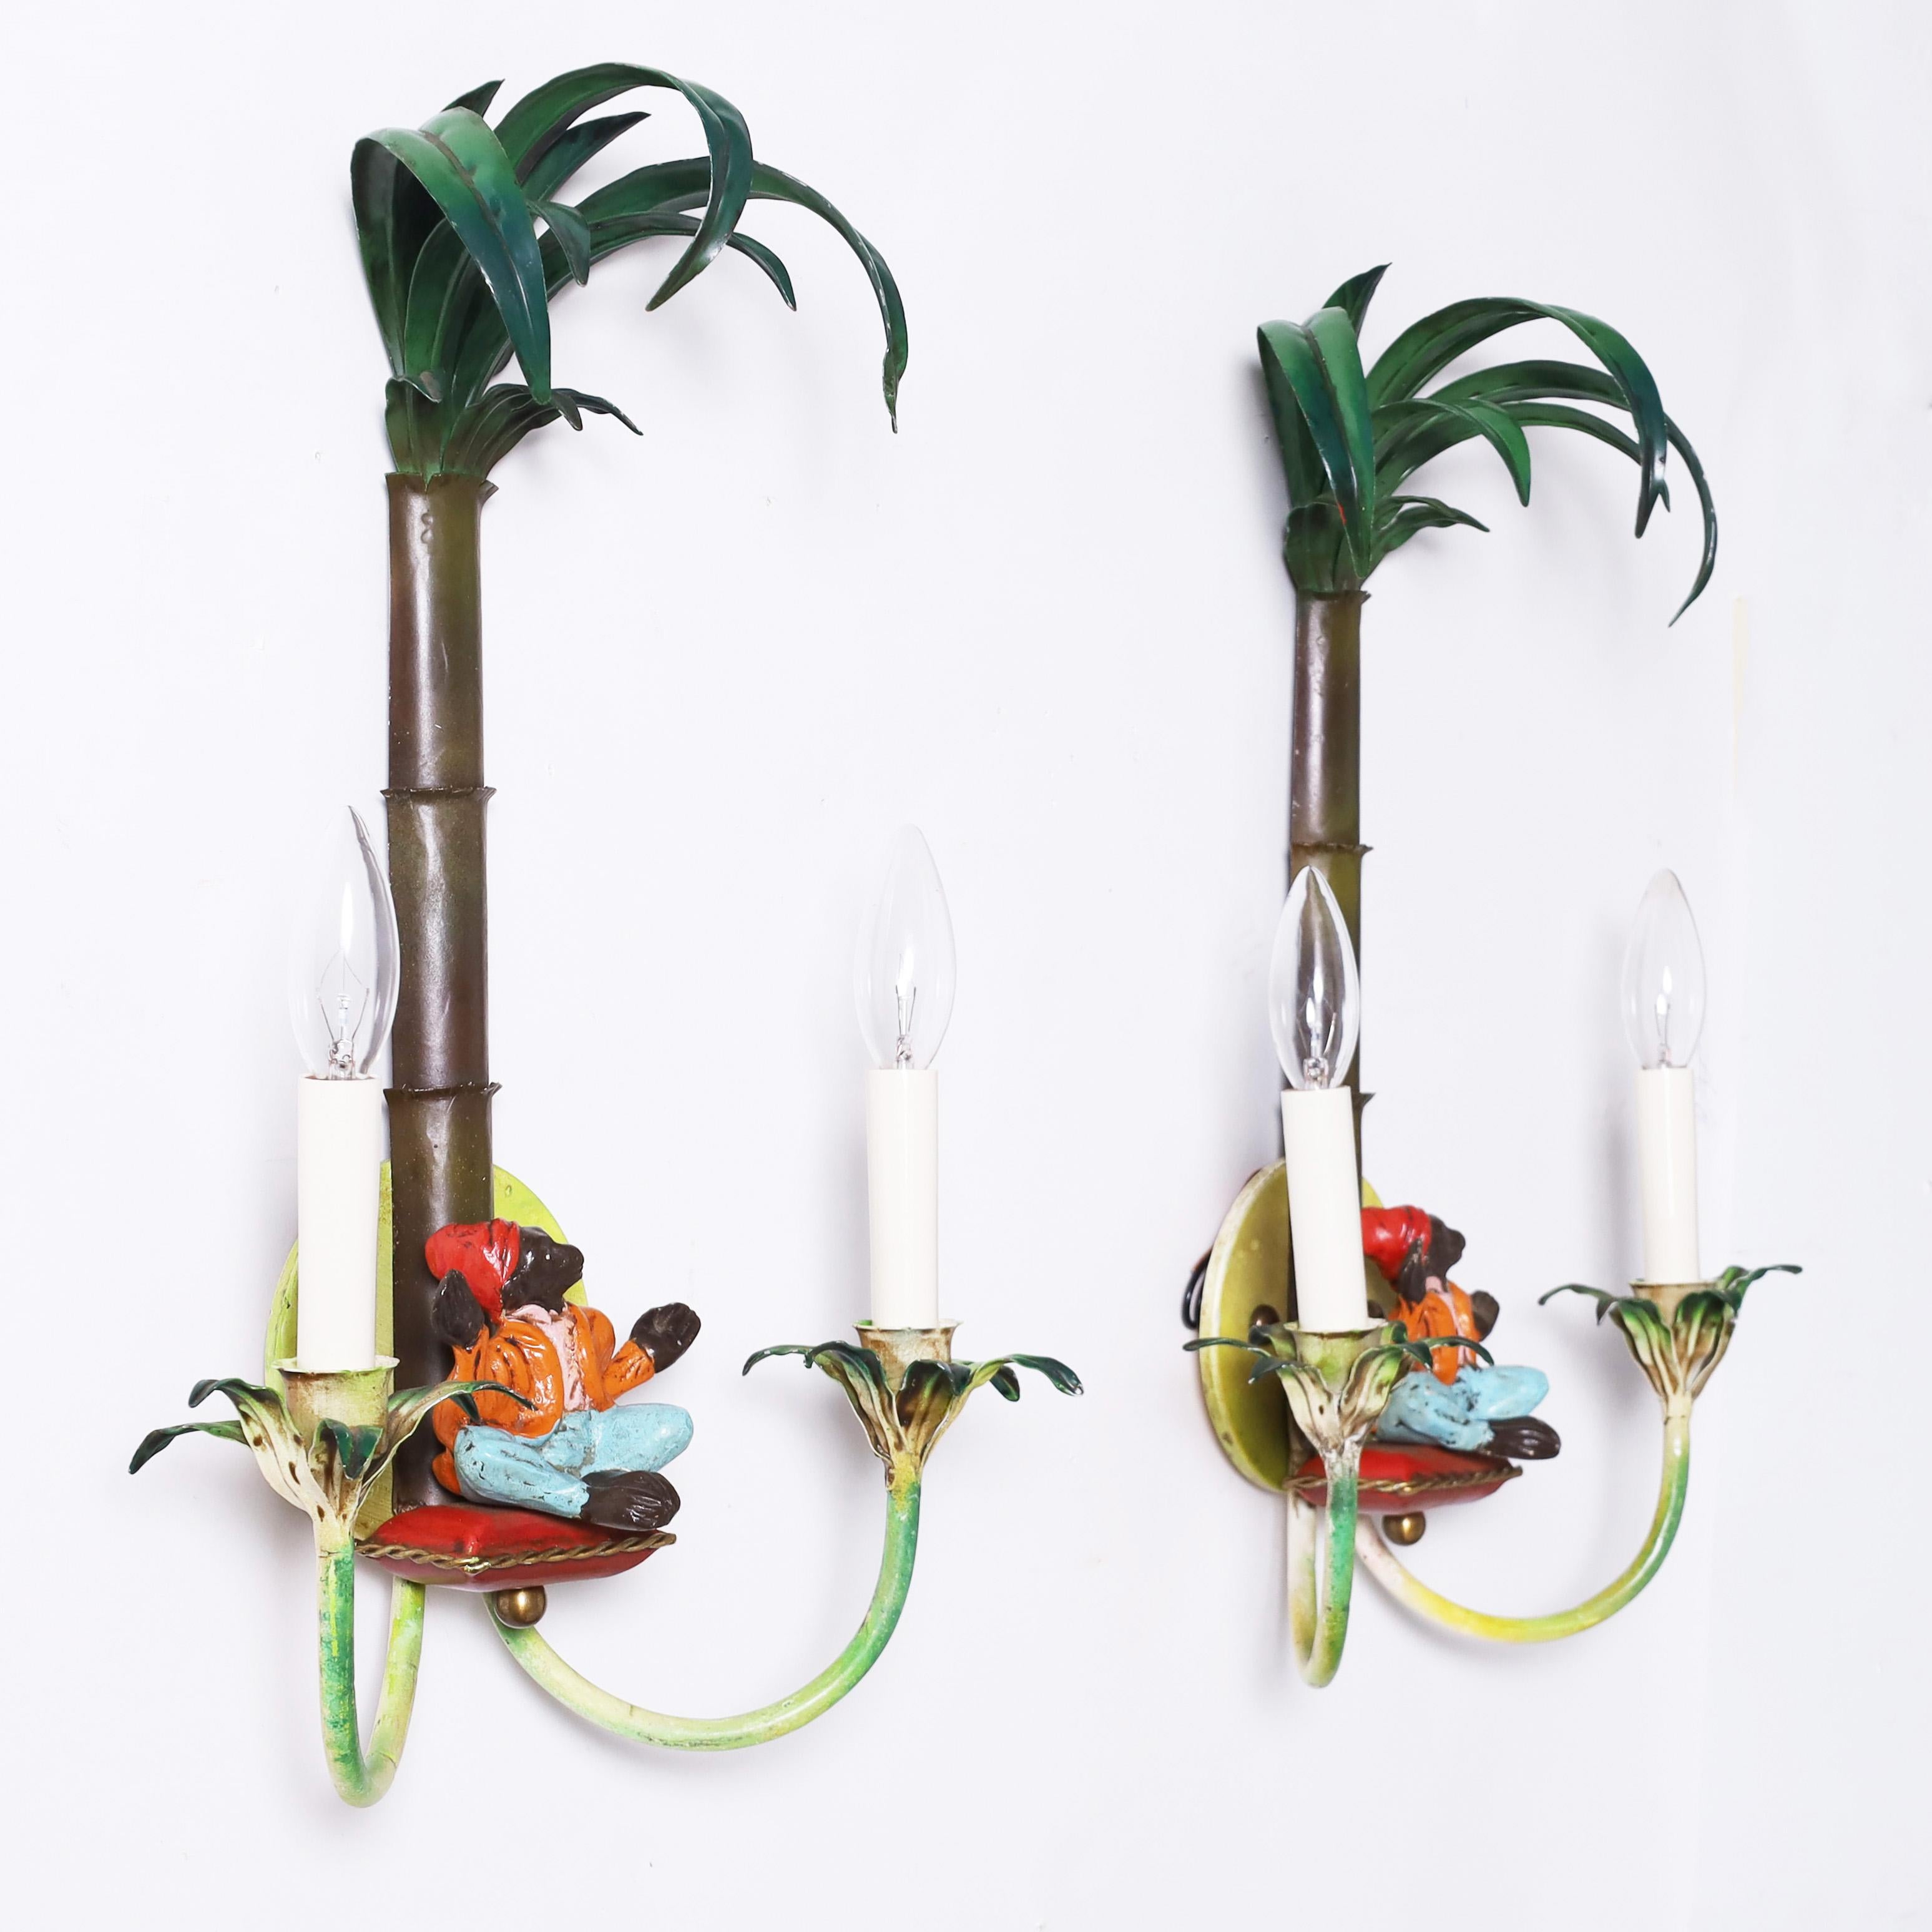 Whimsical pair of vintage Italian wall sconces with palm trees over Moroccan monkeys sitting on a pillow between two arms with leaves around the cups.